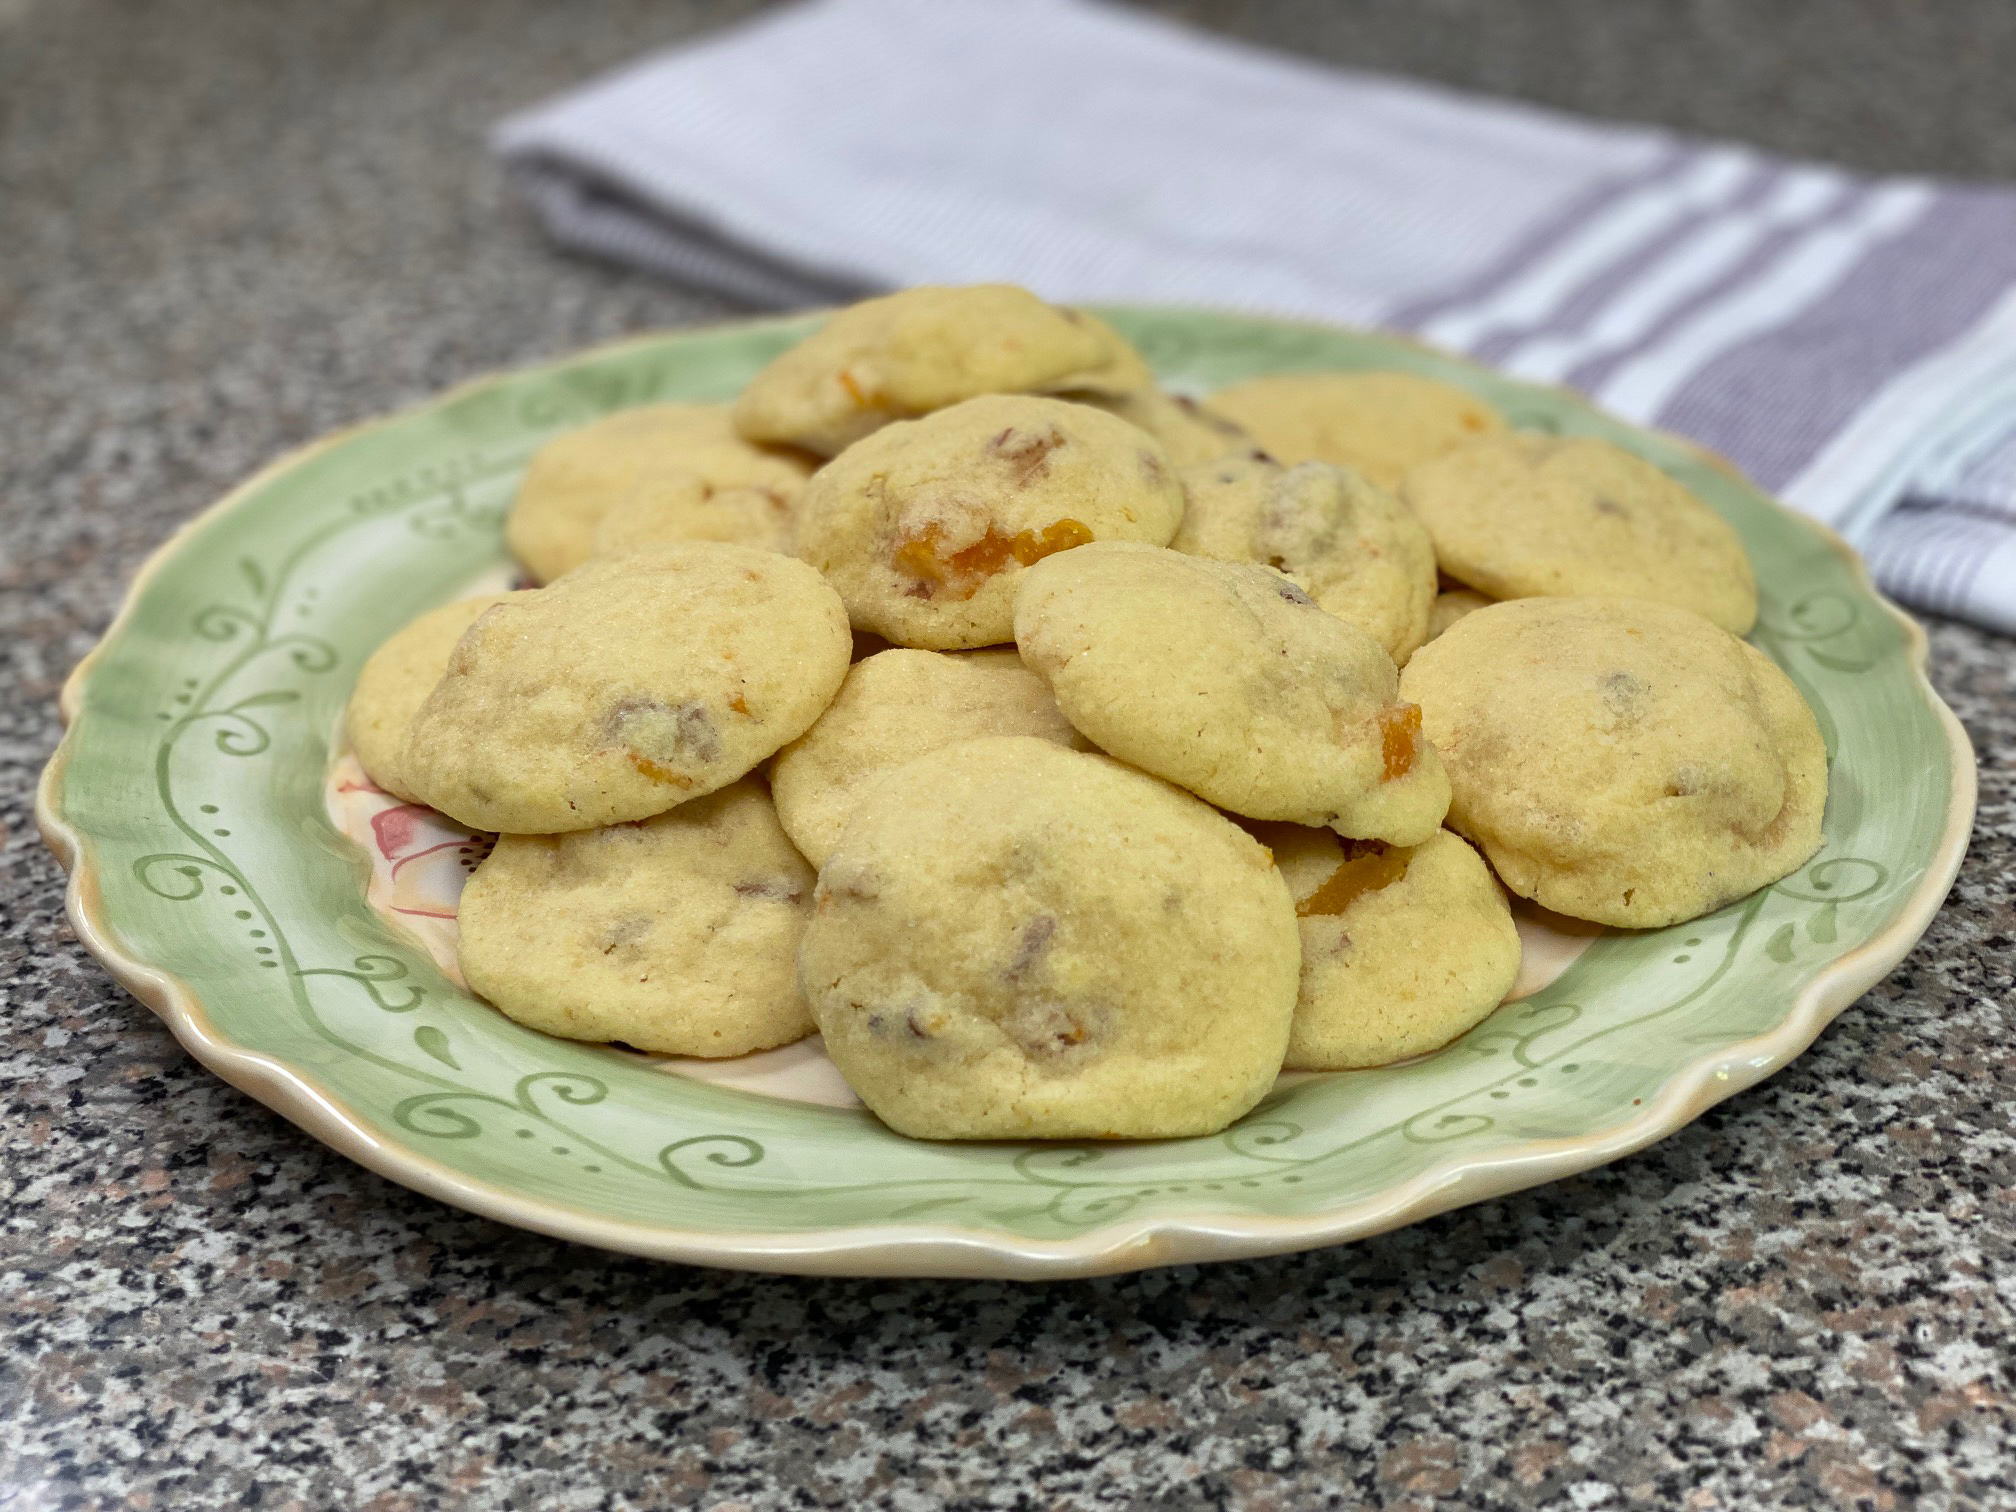 A plate of cookies